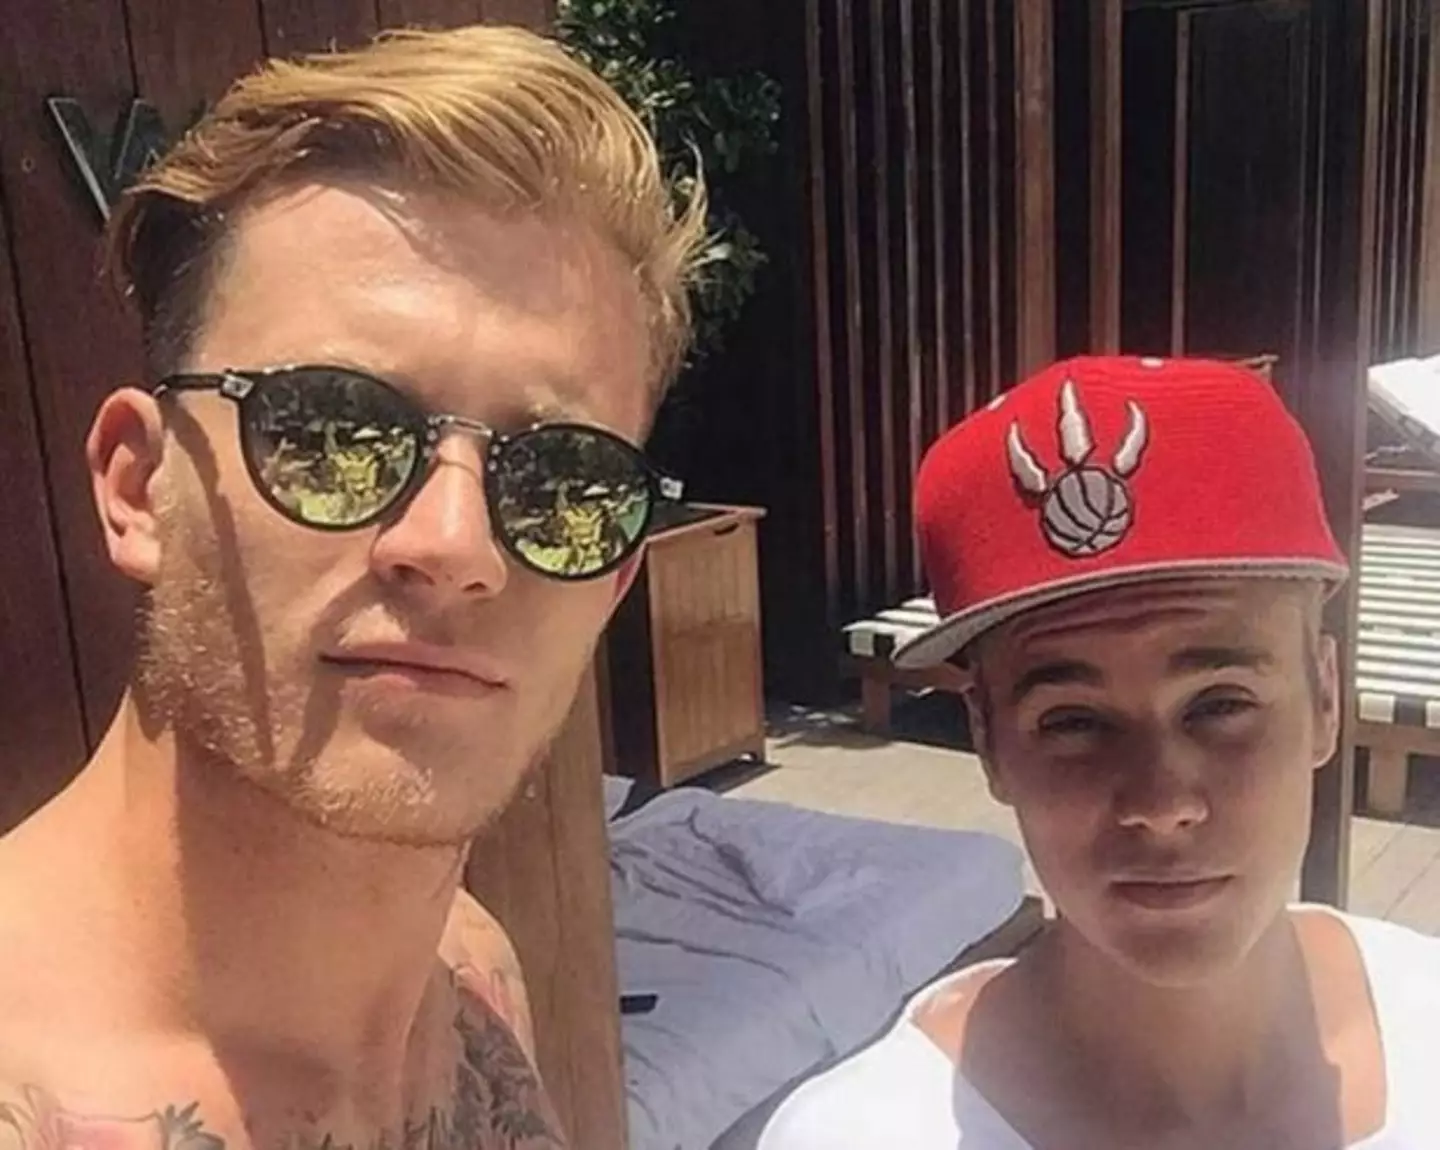 Karius and Bieber pictured together. (Image